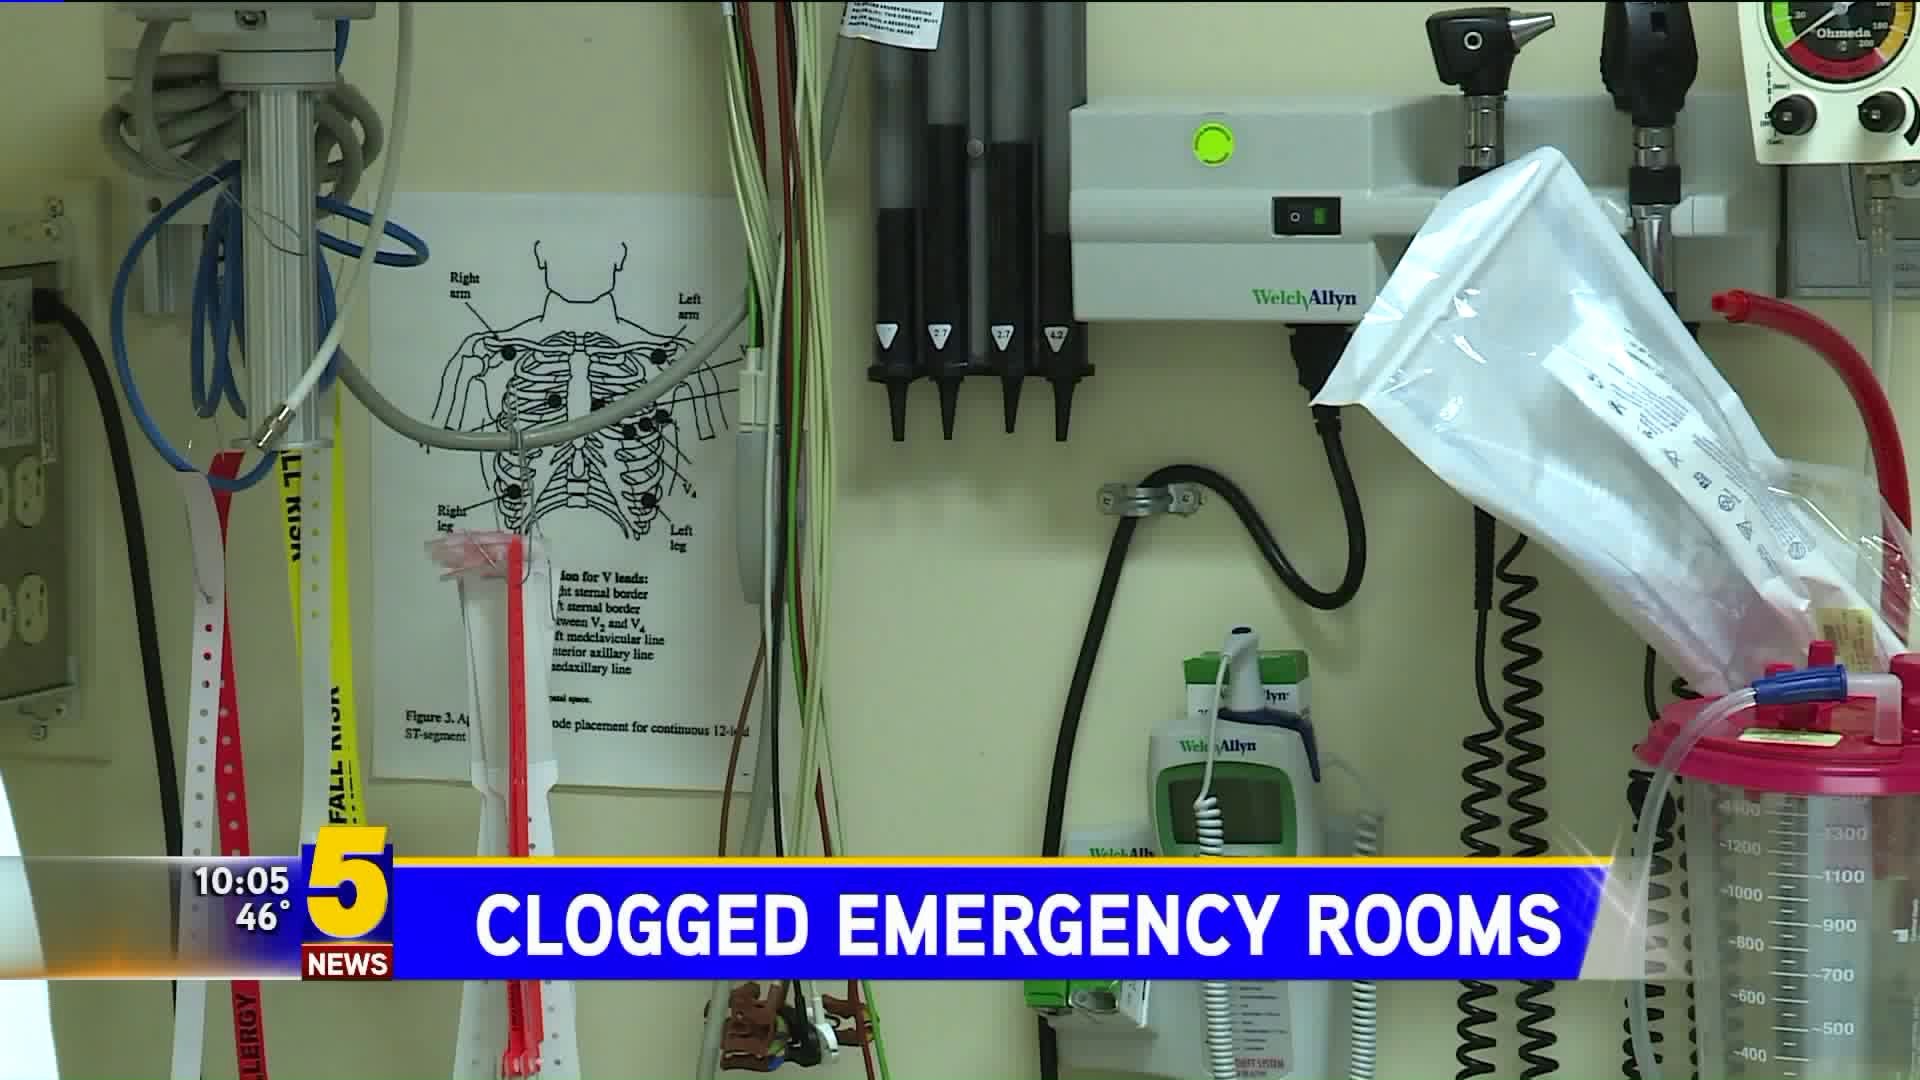 Clogged Emergency Rooms